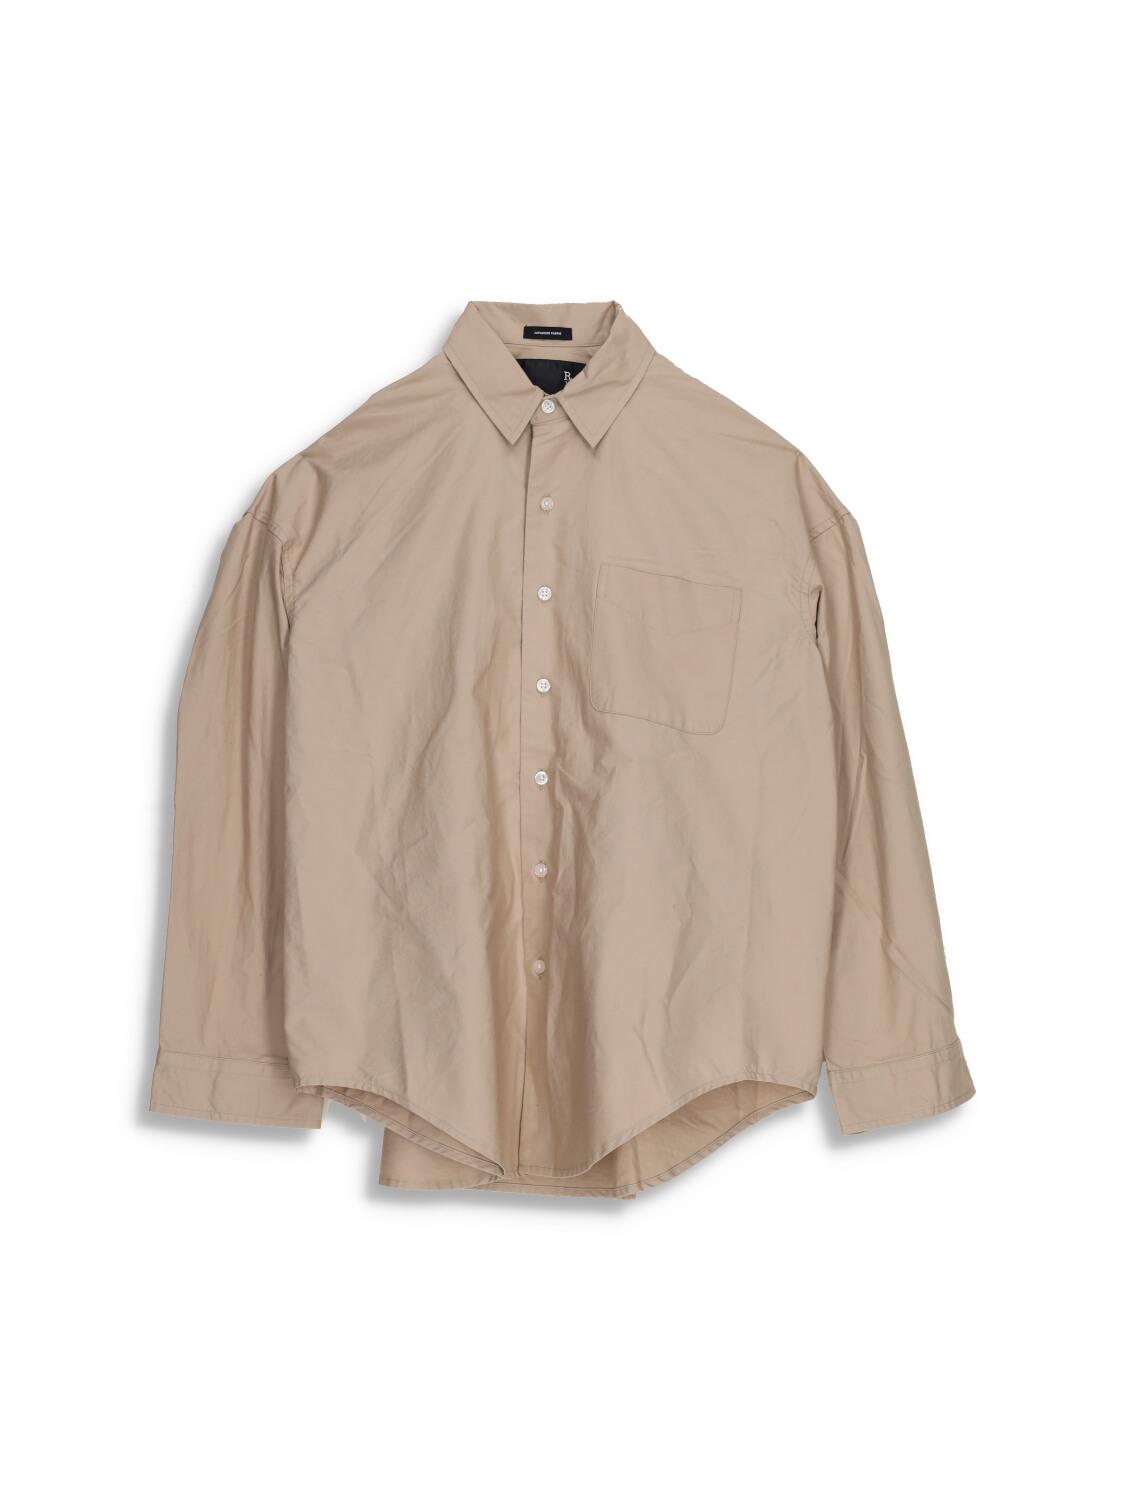 Boxy Button Up- Cotton shirt with chest pocket and button placket